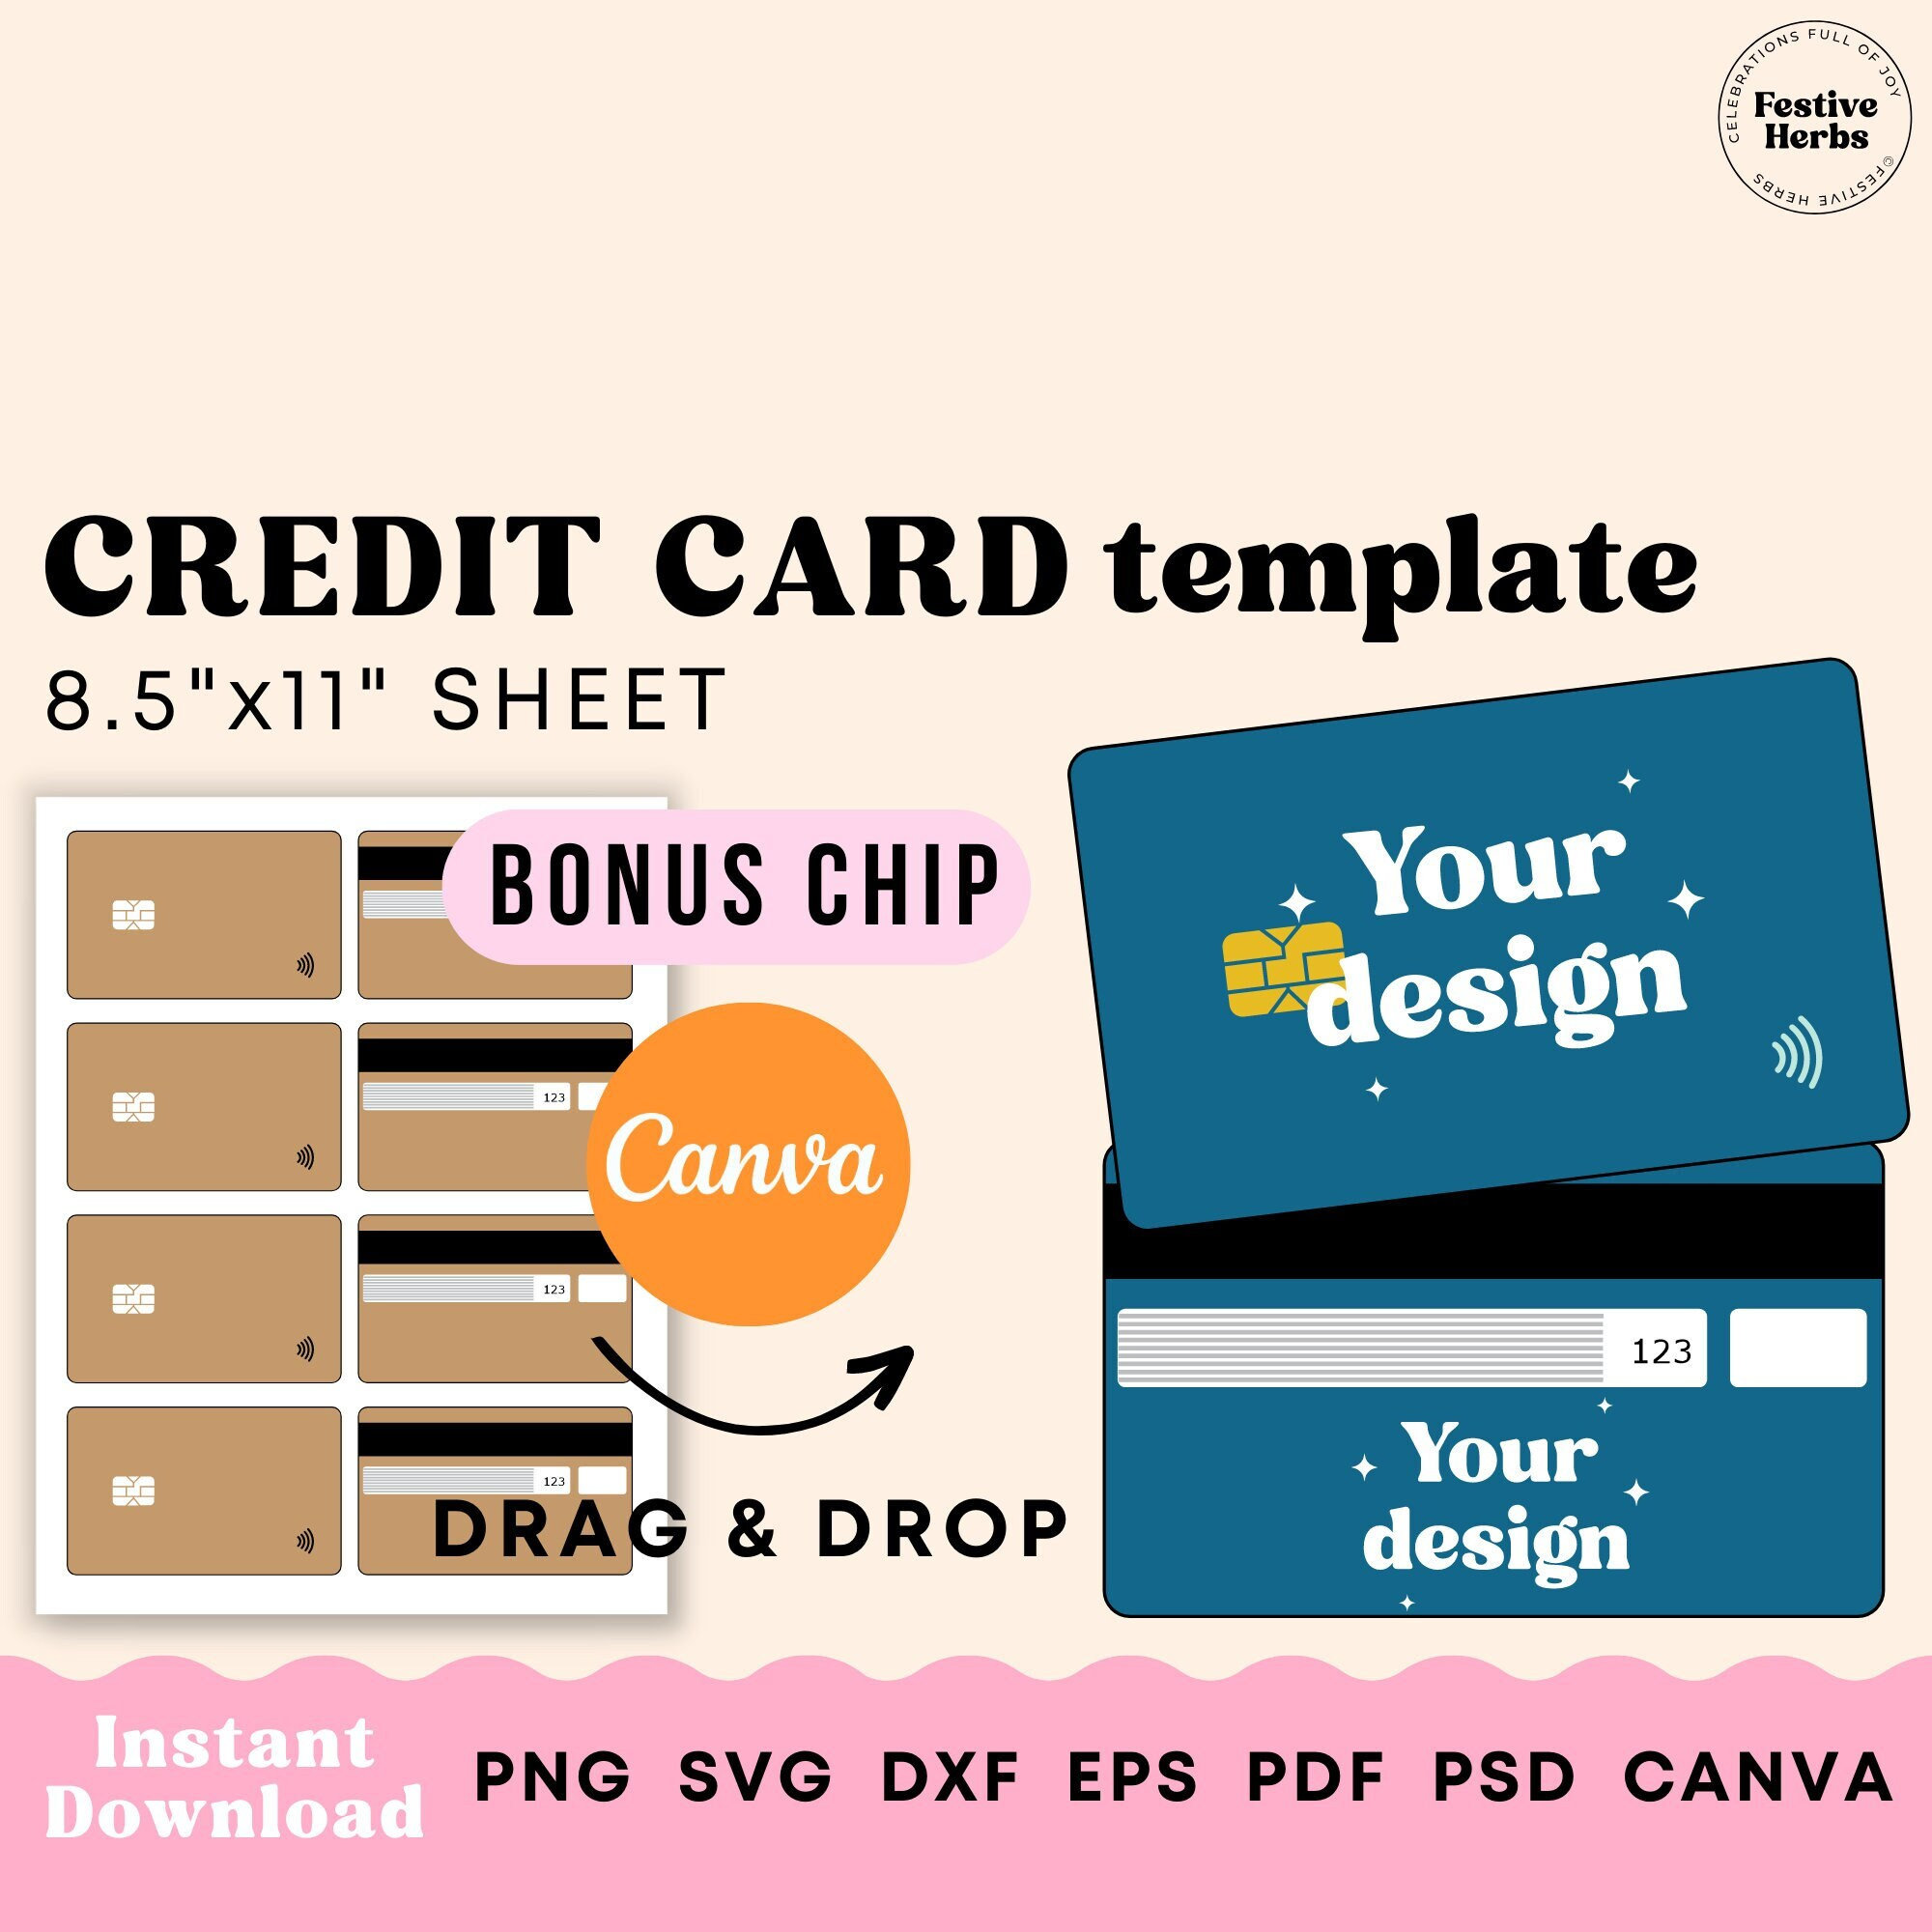 Credit Card Blank Cover Template By ariodsgn